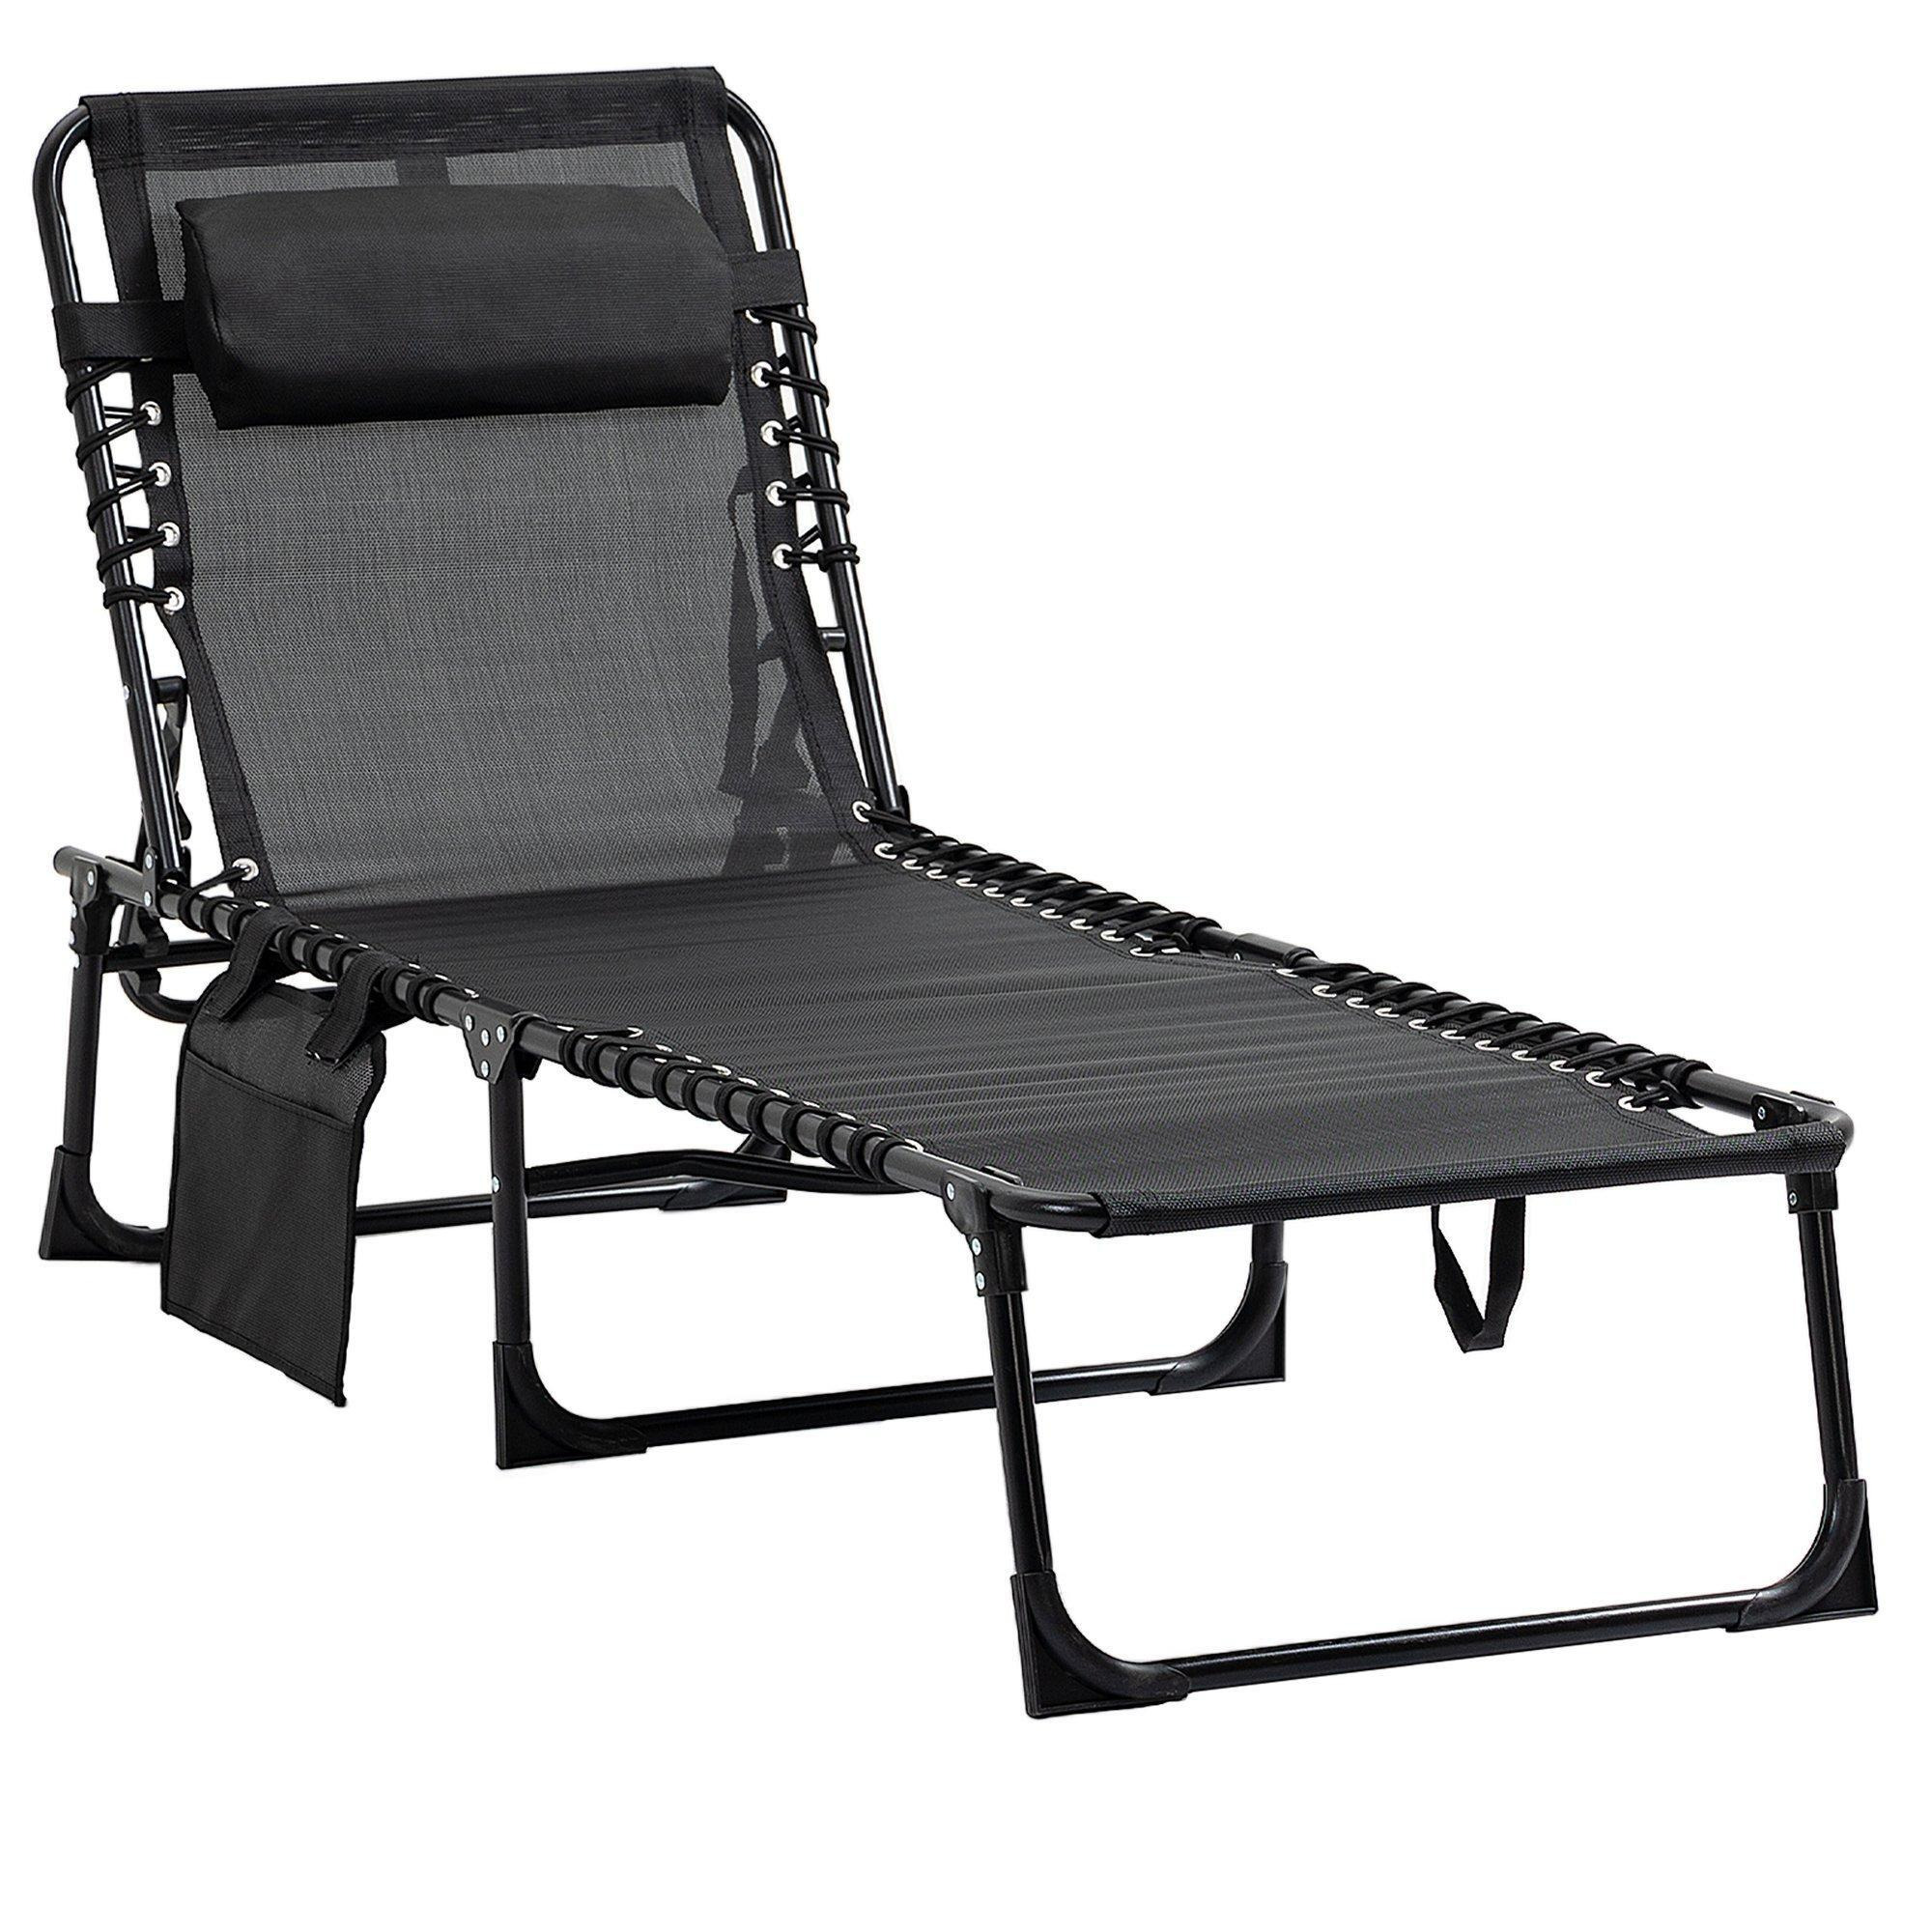 Lounger Folding Reclining Camping Bed 5-position Adjustable - image 1